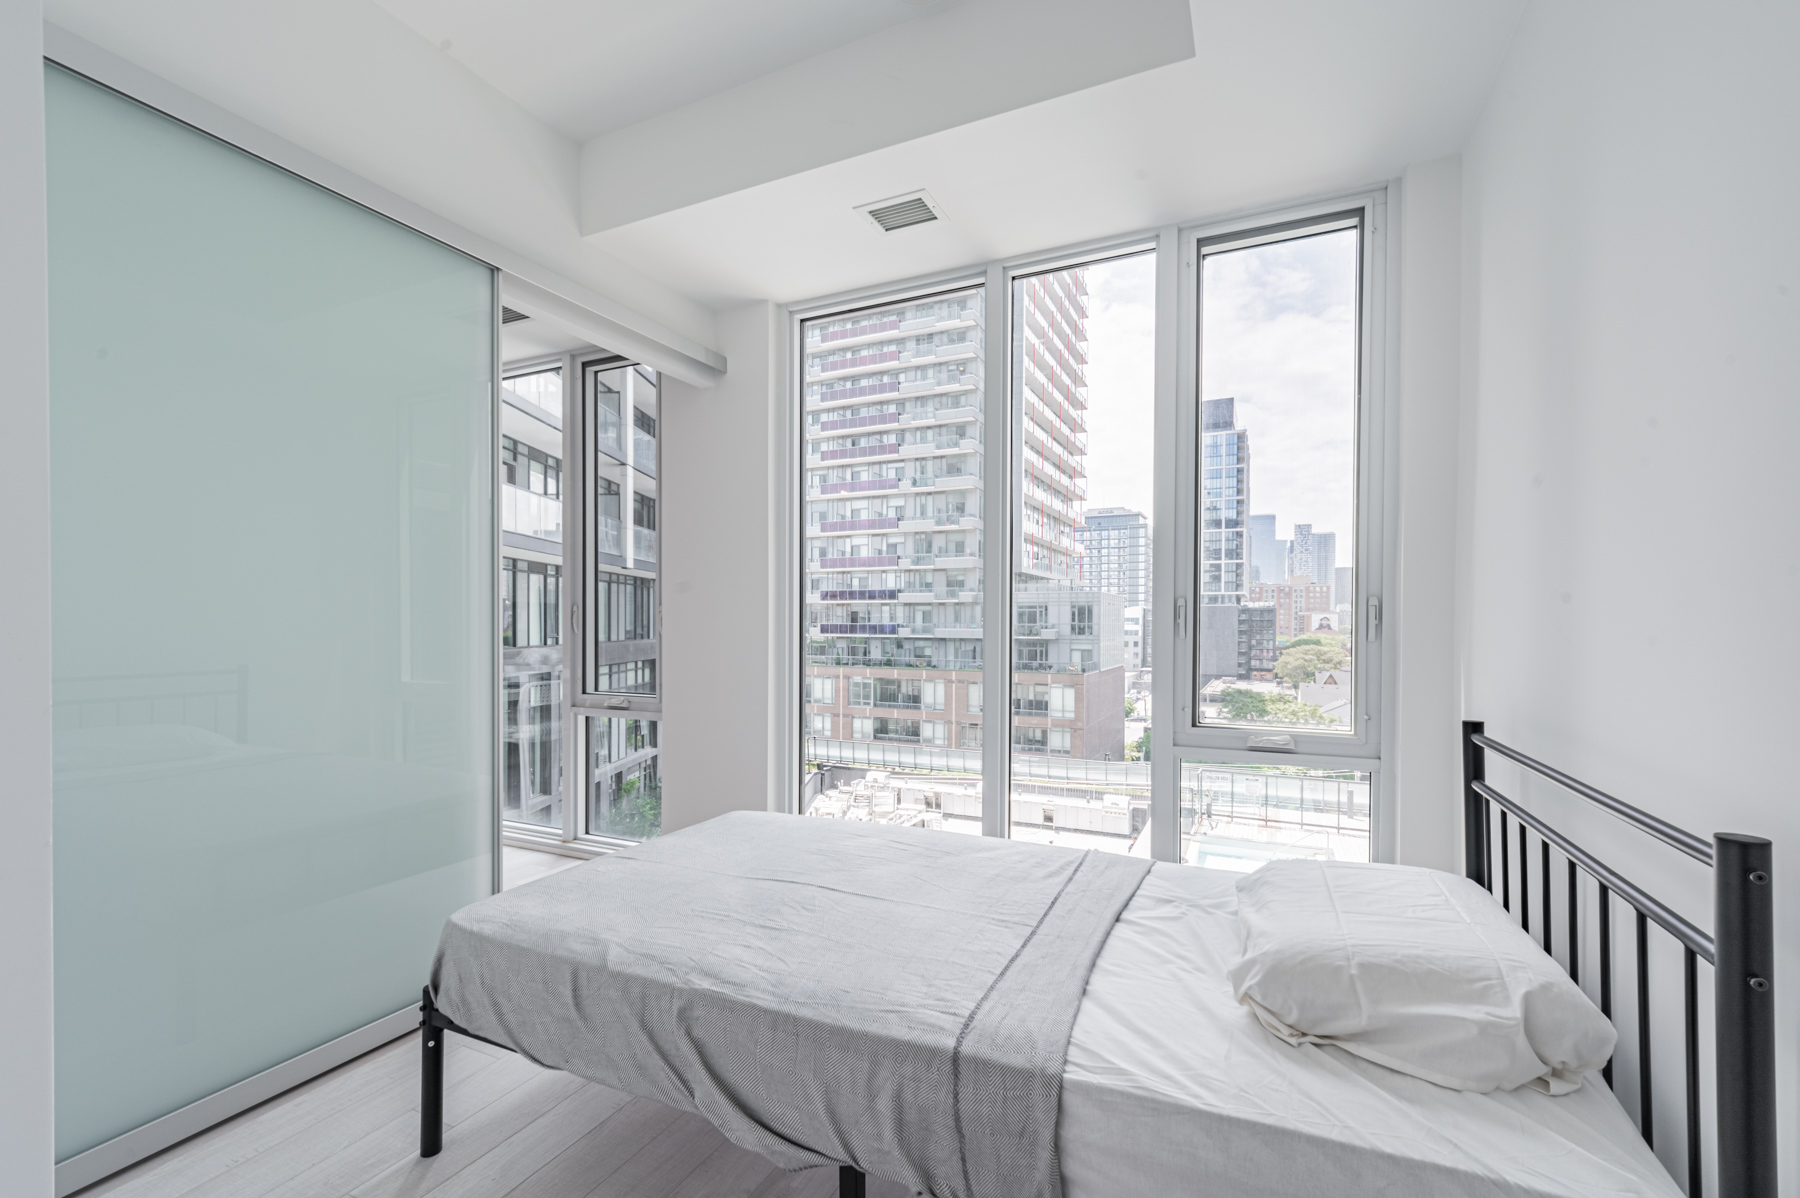 50 Power St Unit 618 second bedroom with large windows showing city view.